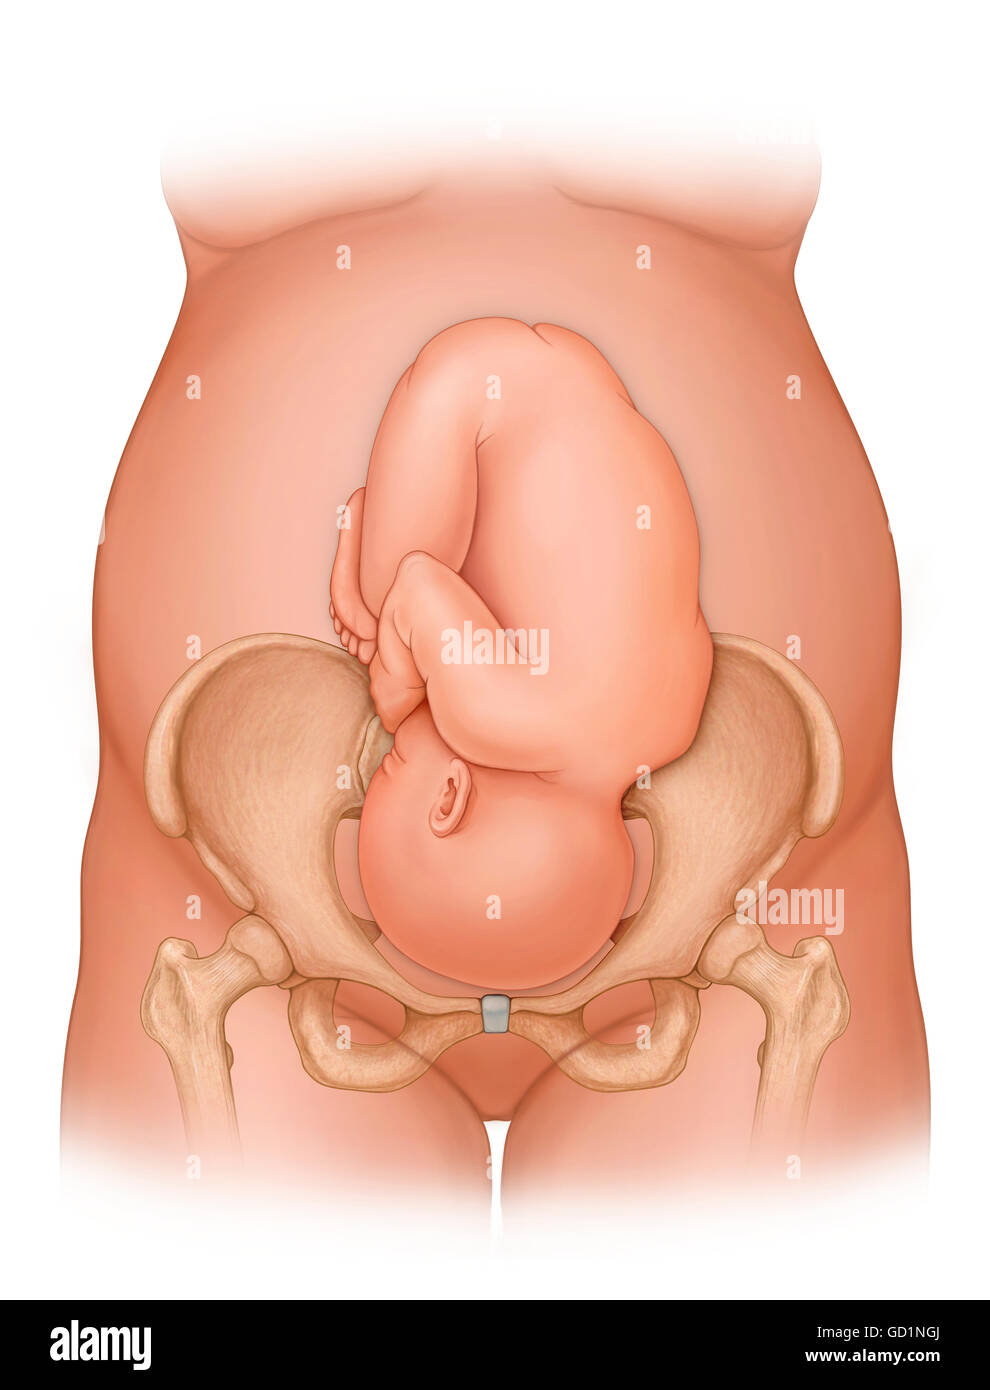 Front view of a woman nine months pregnant  (baby phantomed within) ready for delivery, with baby in proper position for delivery Stock Photo